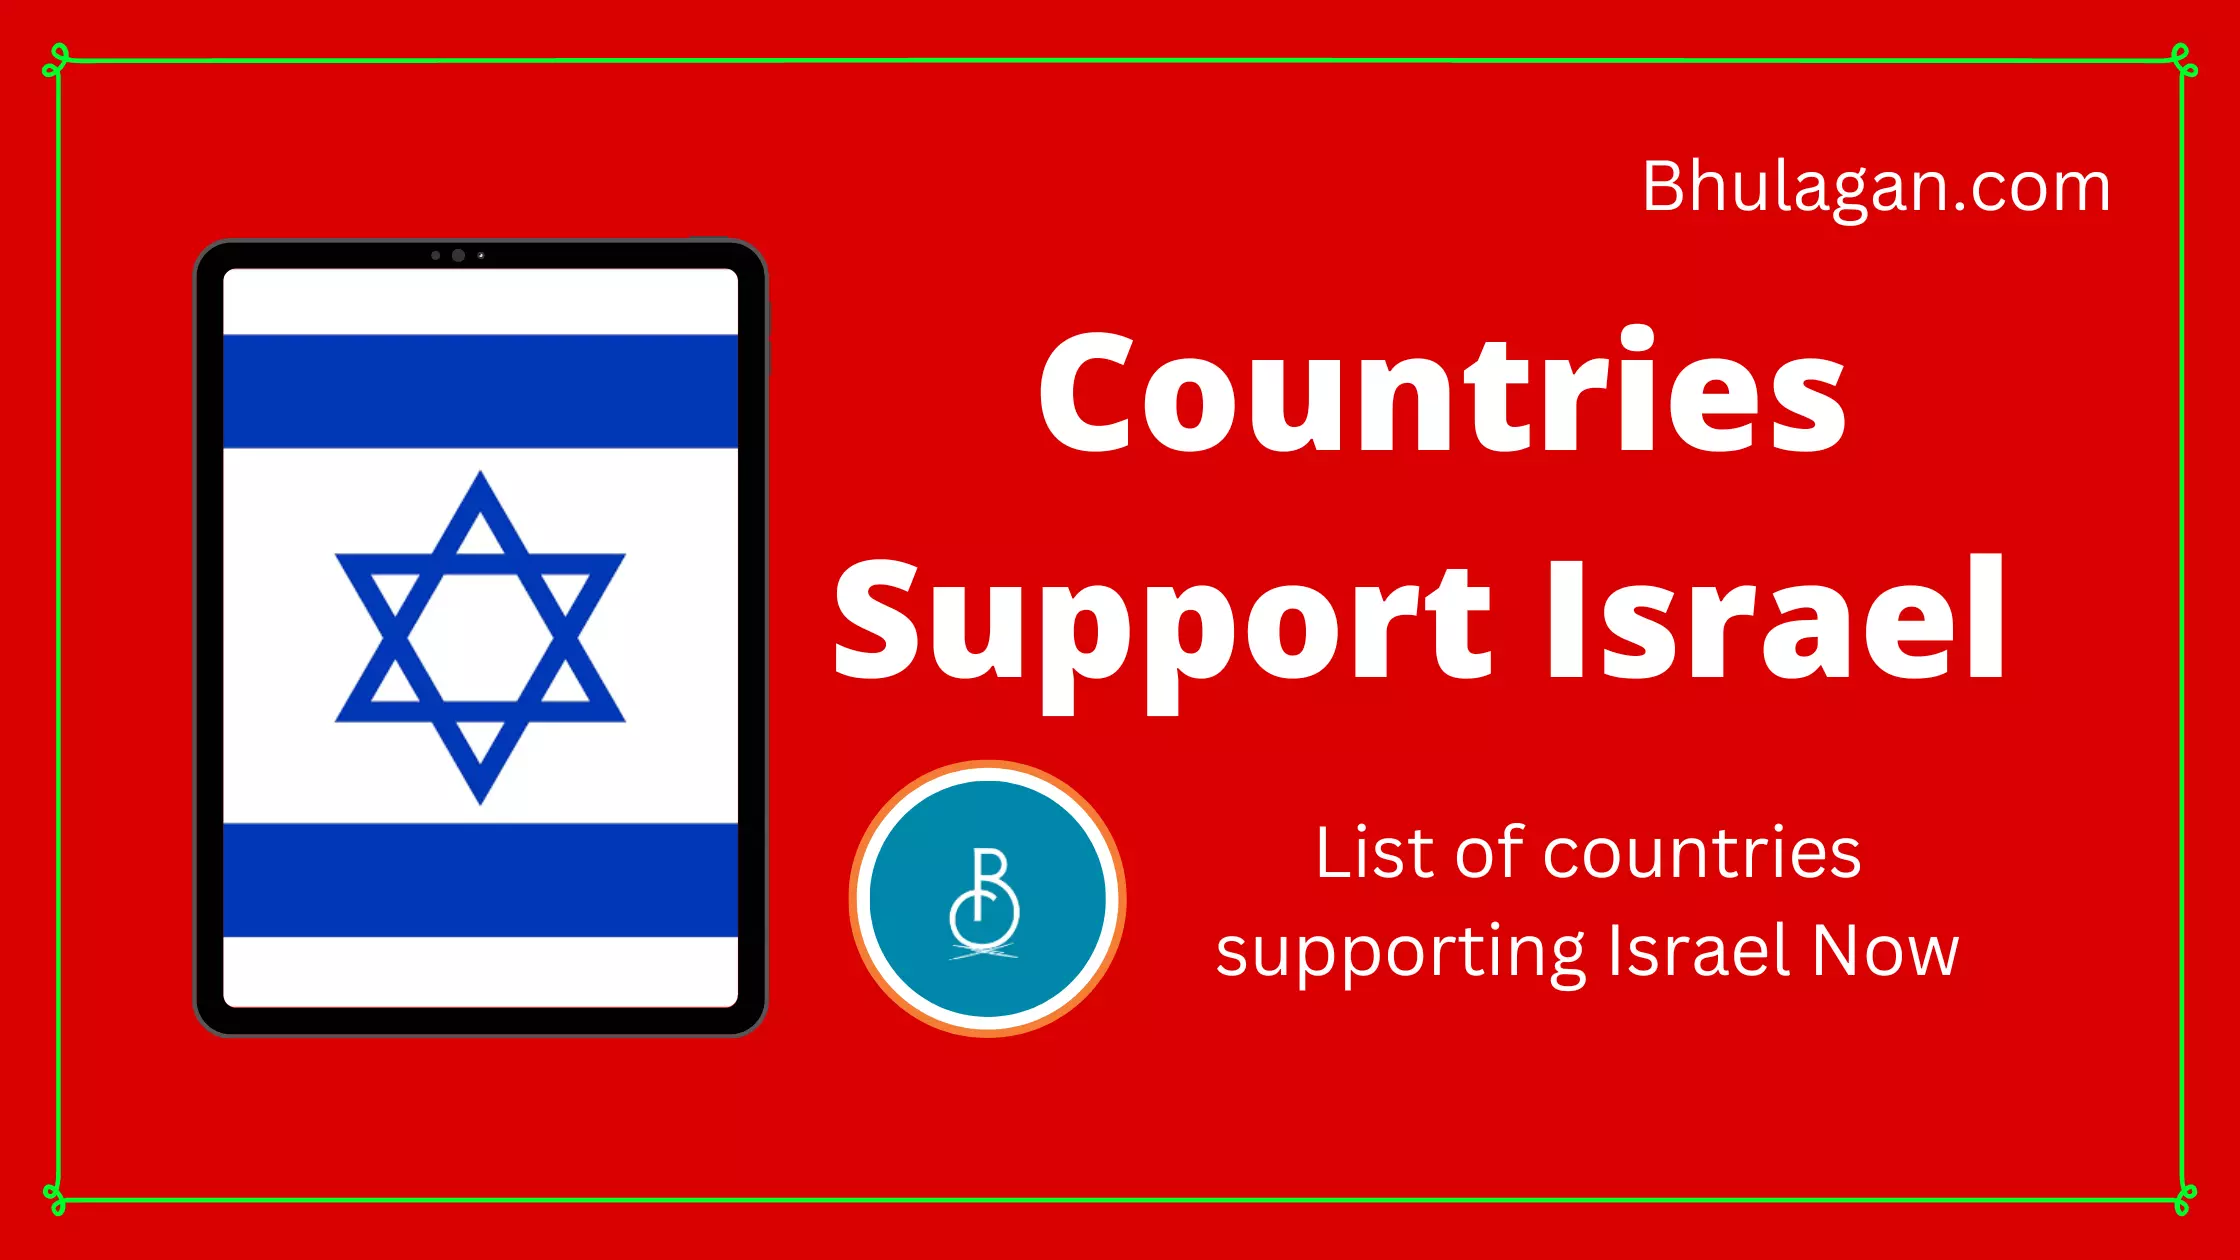 List of Countries Supporting Israel